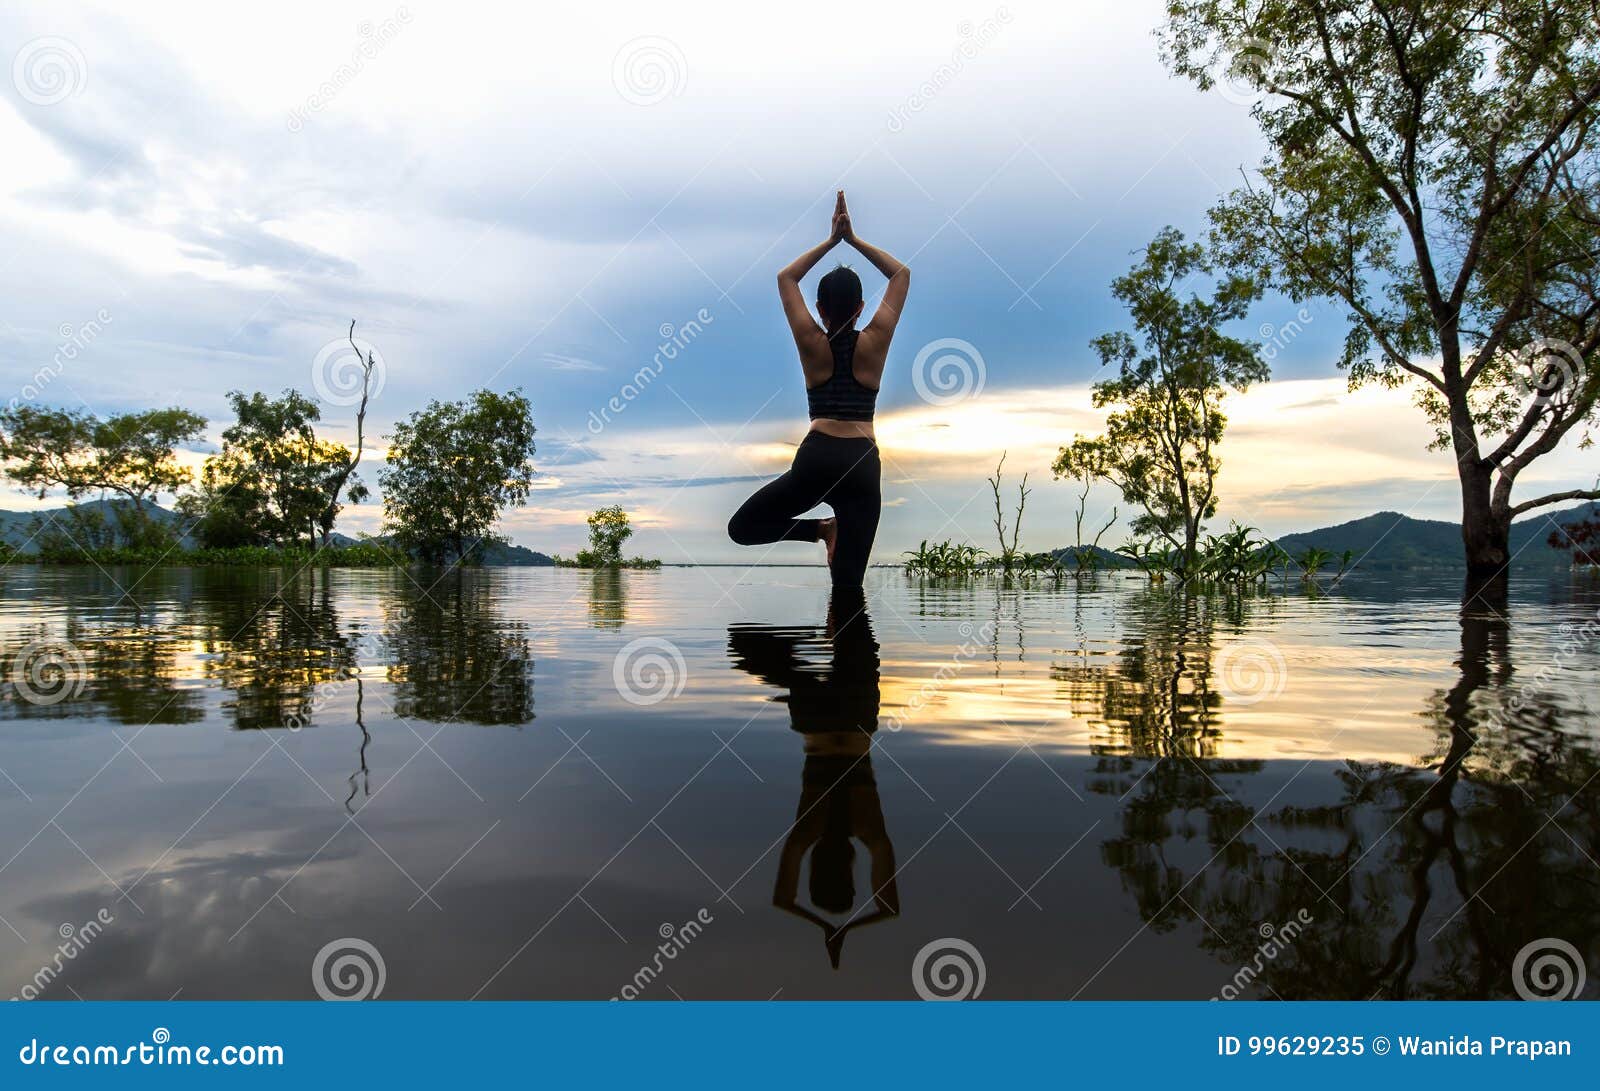 silhouette young woman lifestyle exercising vital meditate and practicing reflect on flood the trees in the reservoir, background